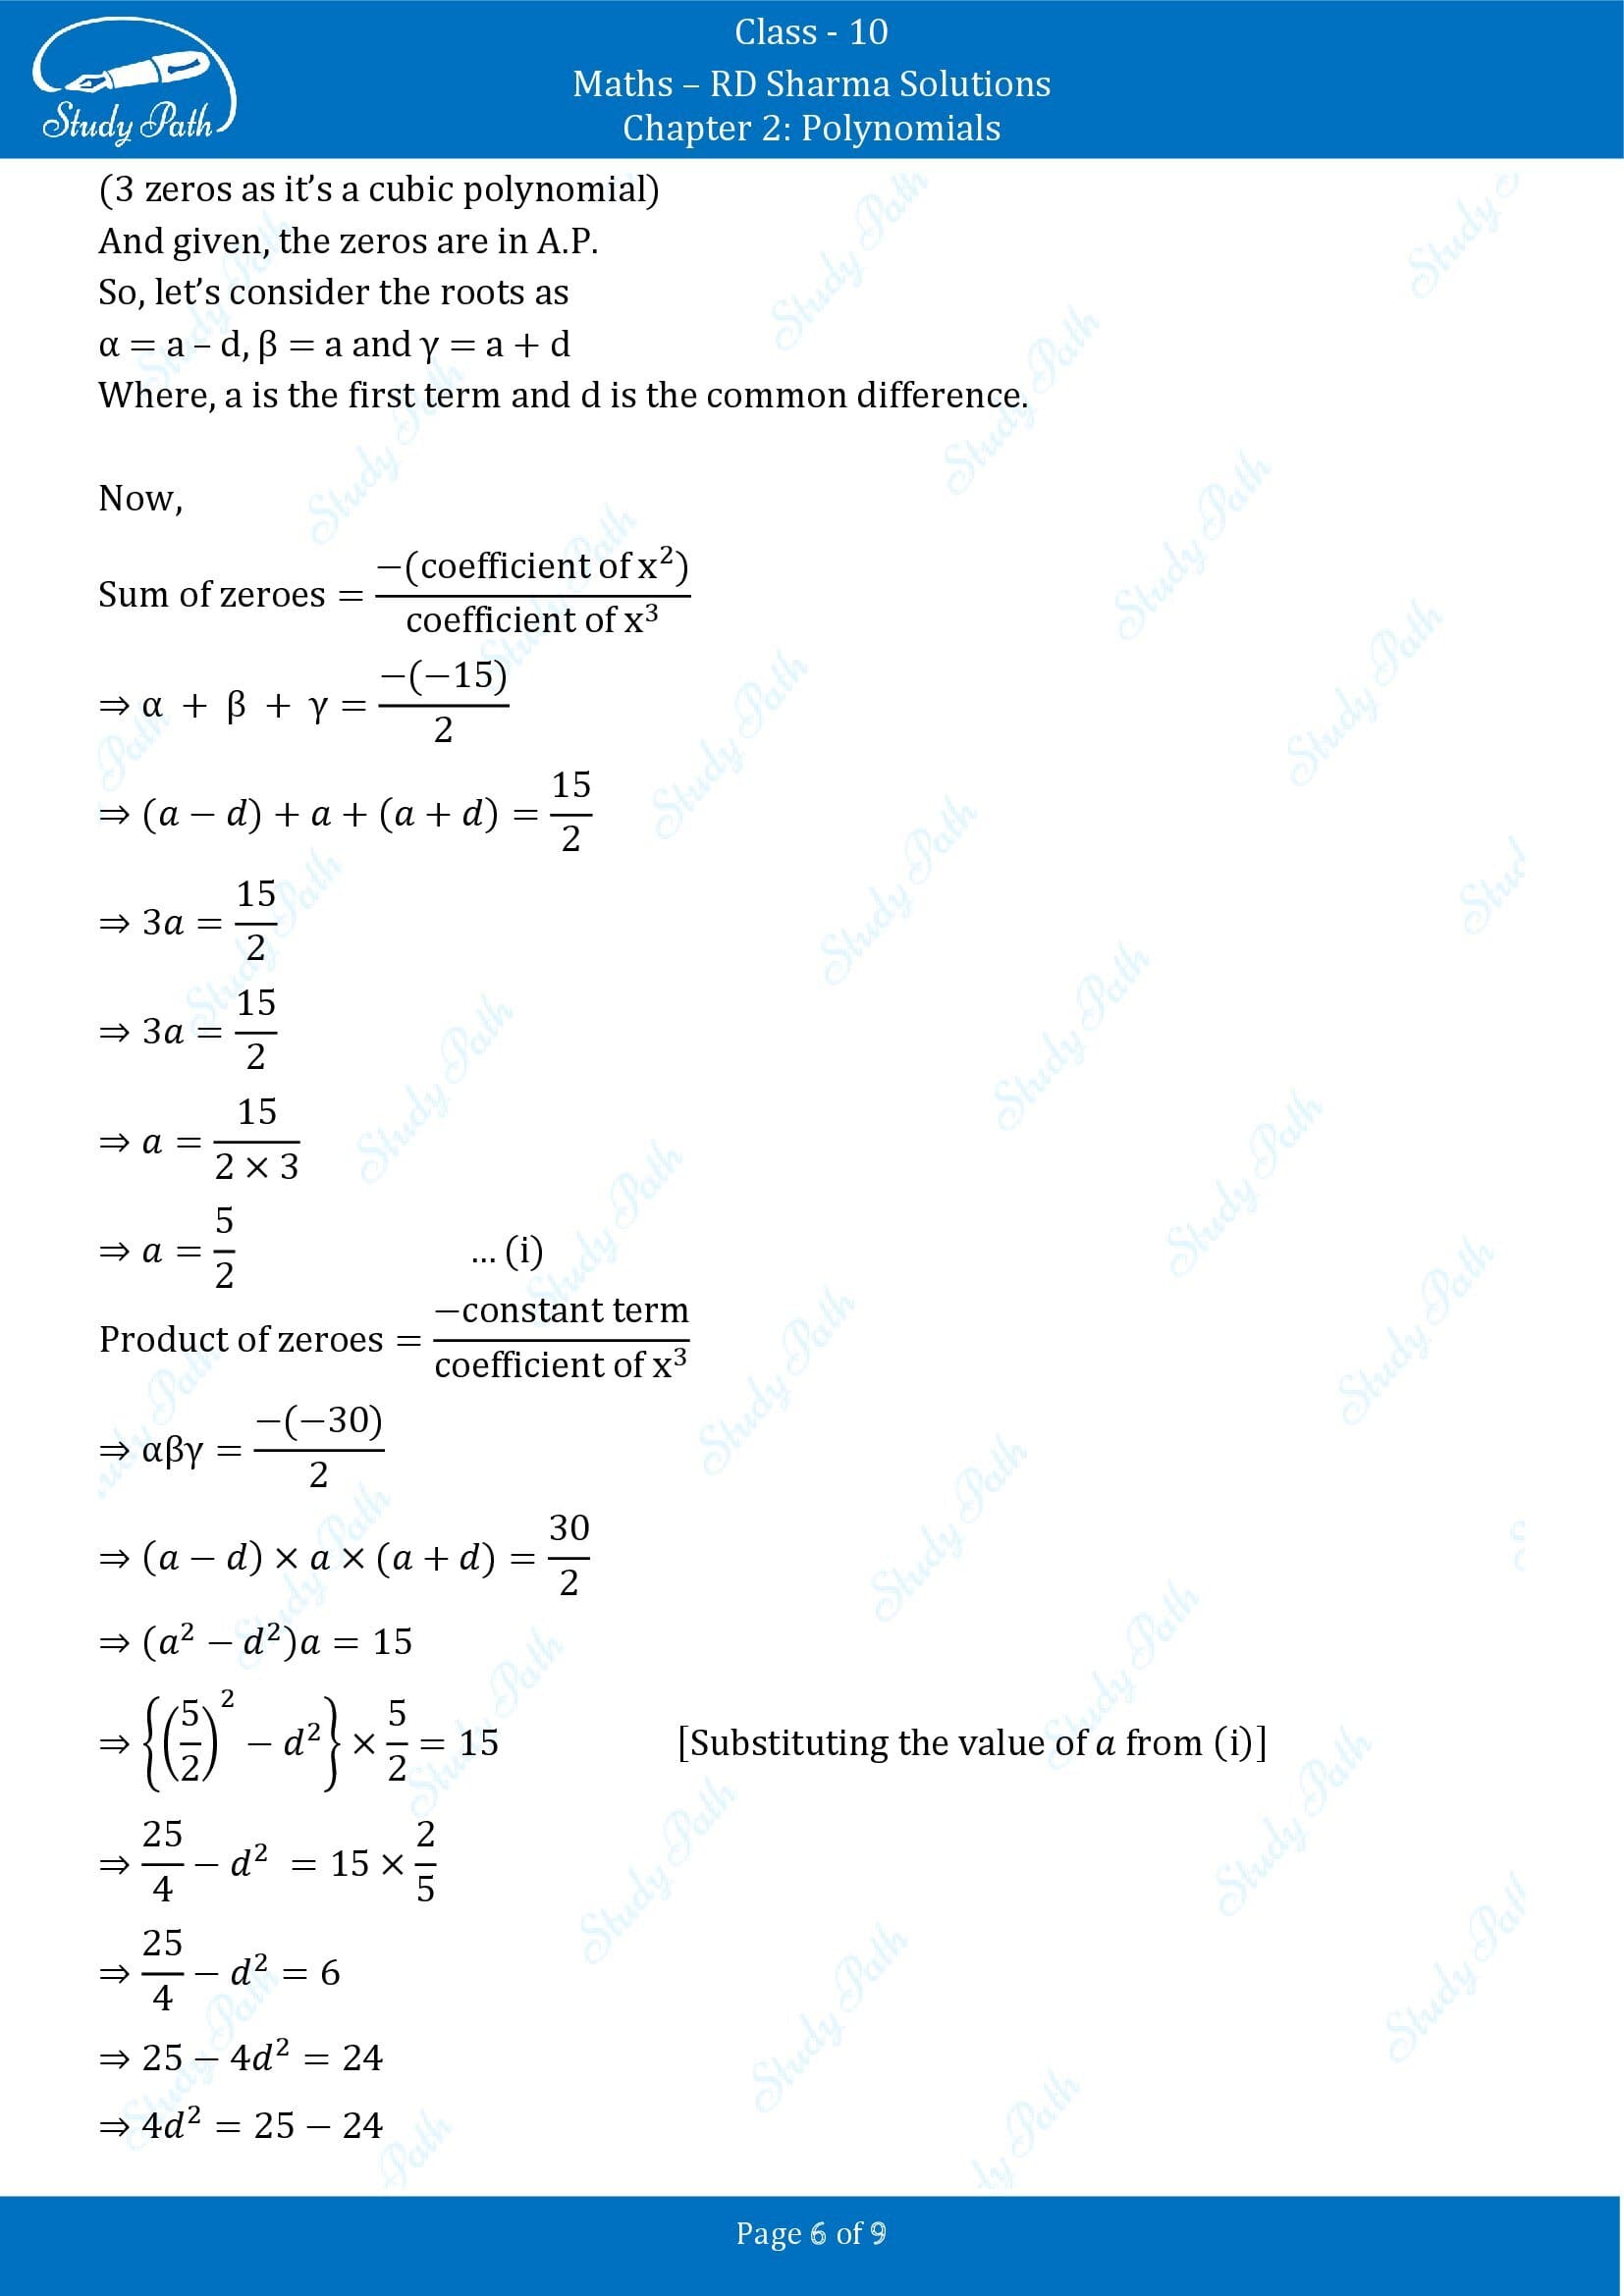 RD Sharma Solutions Class 10 Chapter 2 Polynomials Exercise 2.2 00006